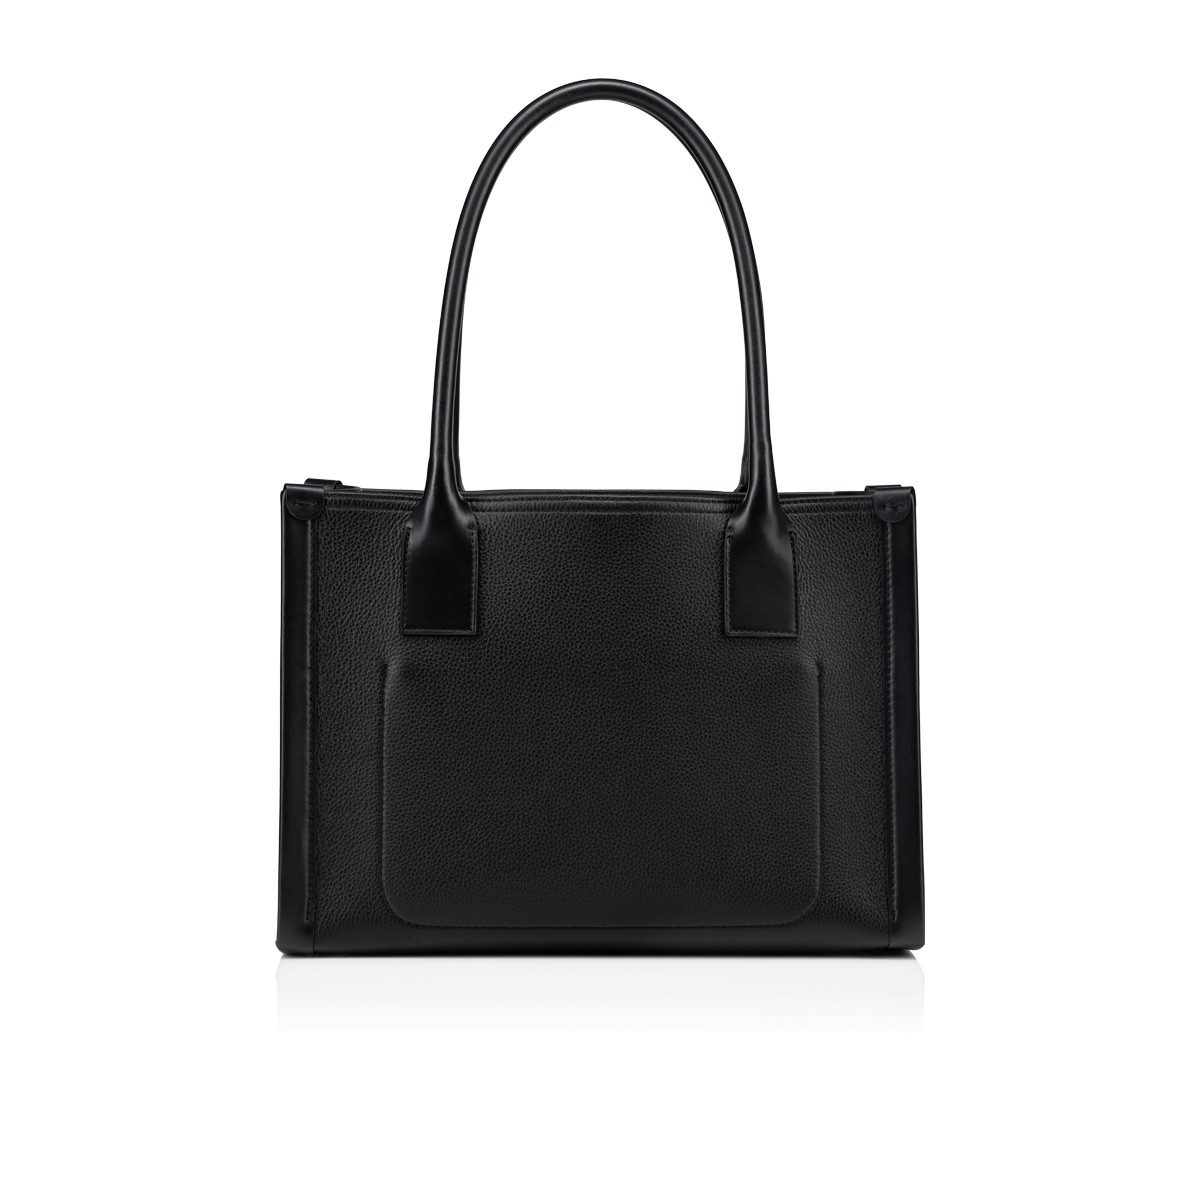 By My Side small Black Calf leather - Handbags - Christian Louboutin